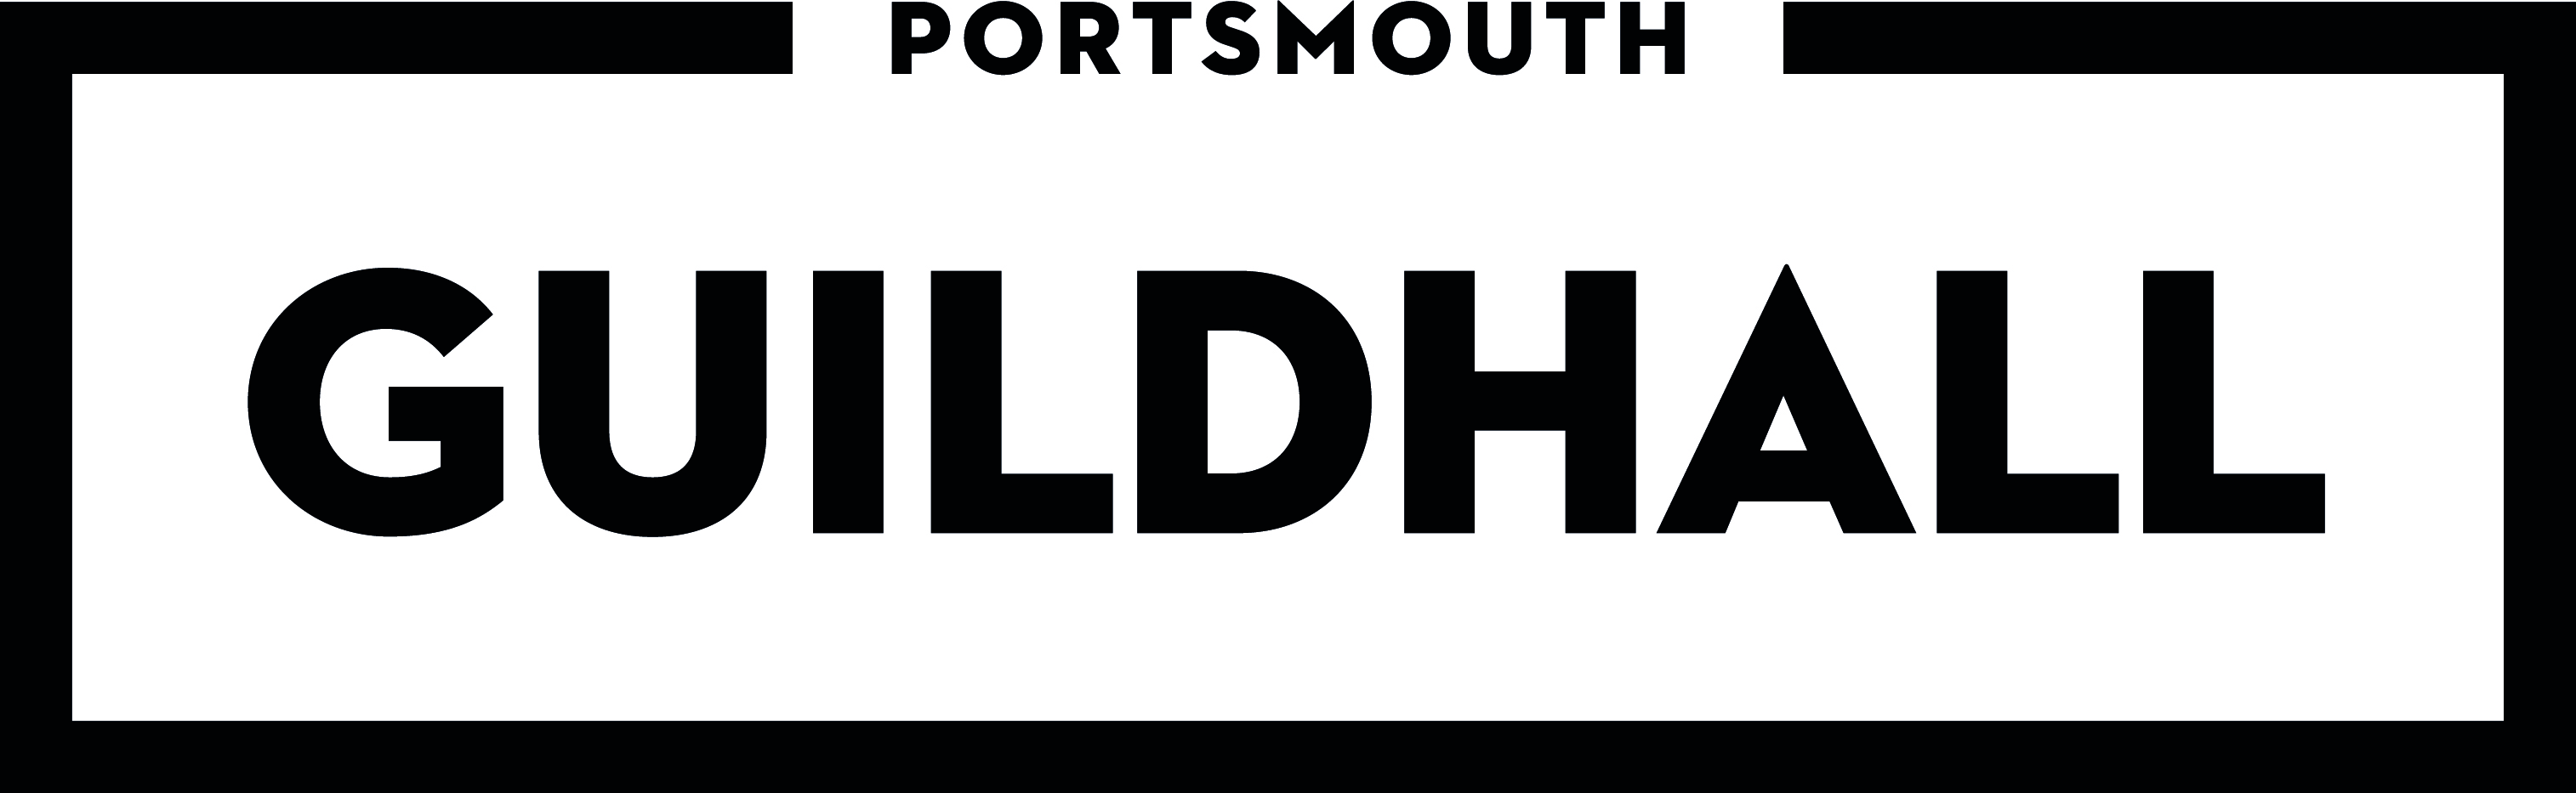 Logos | Portsmouth Guildhall